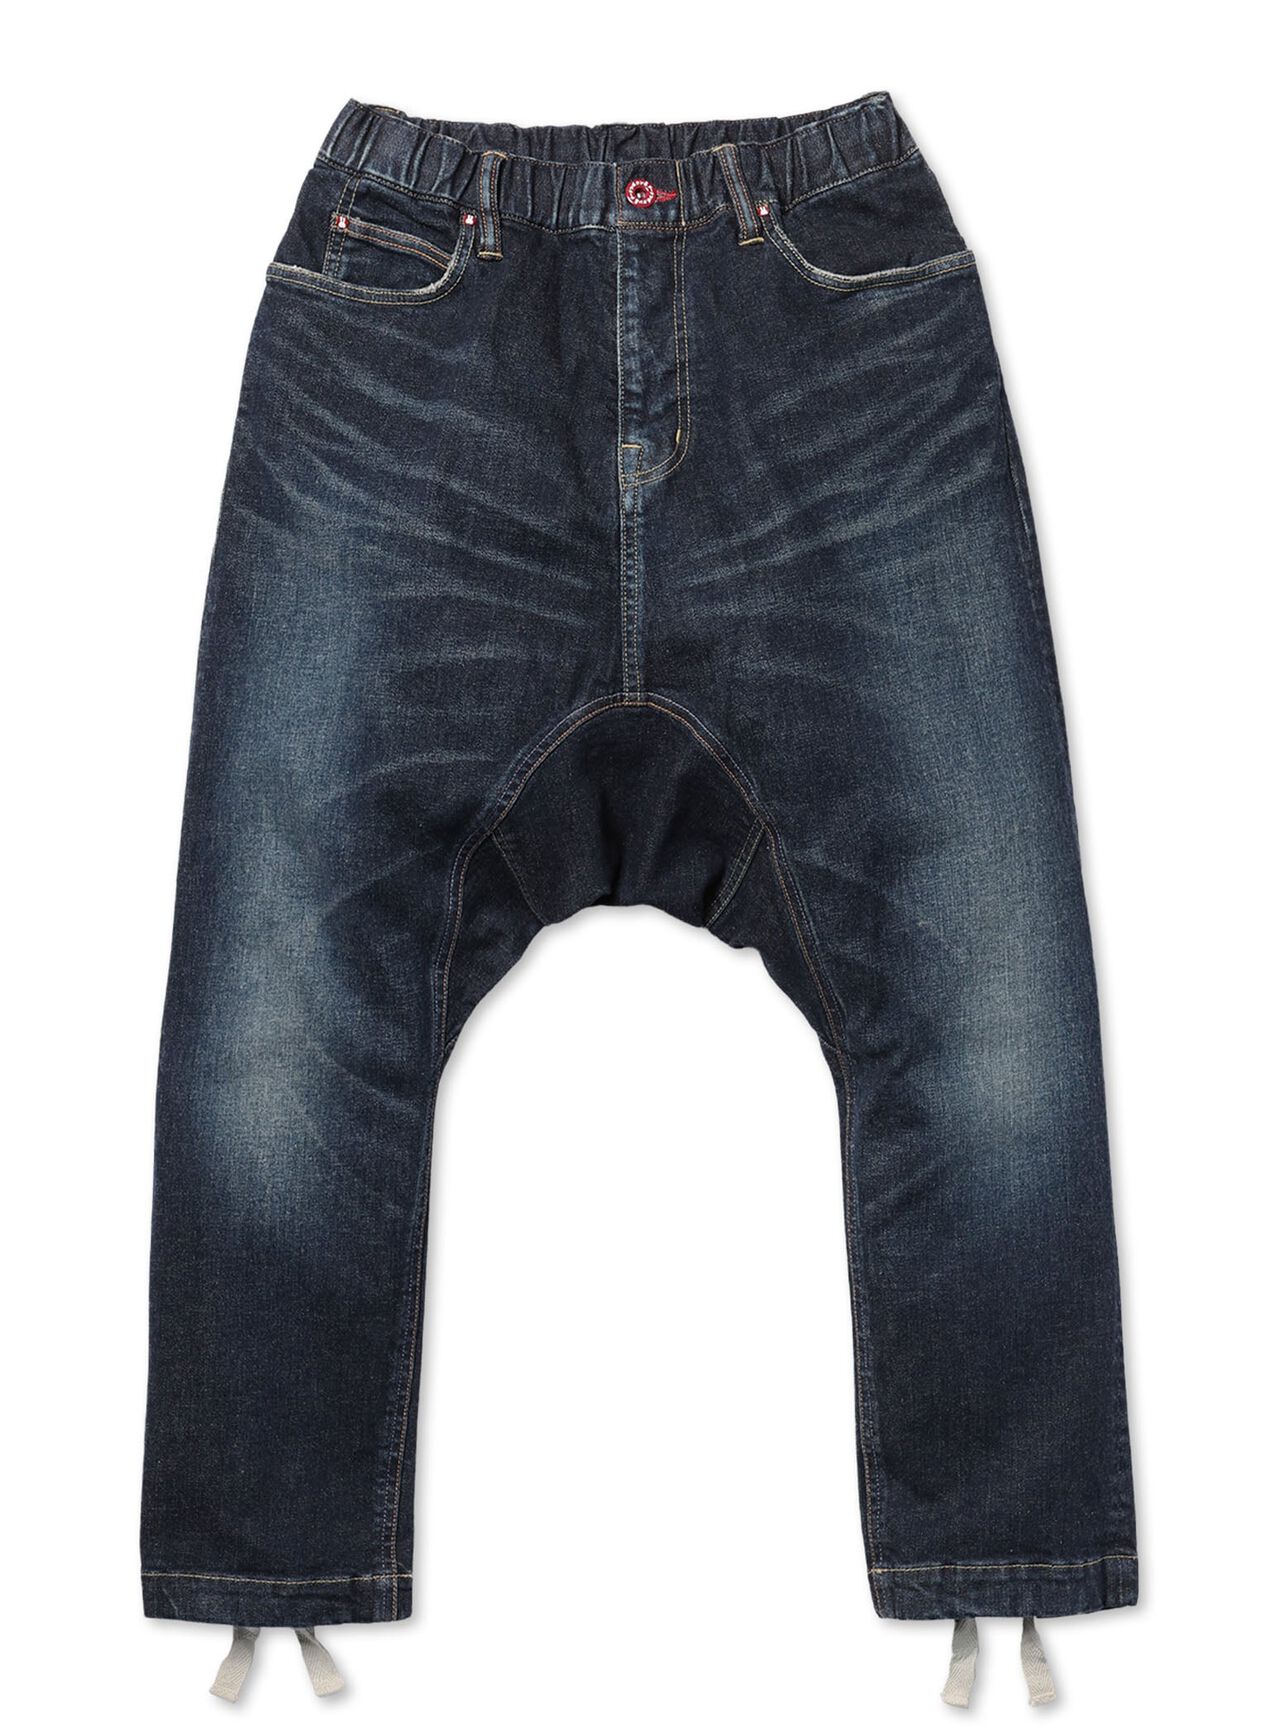 Jeans - Crotch 22-U2 3 years,M, large image number 0